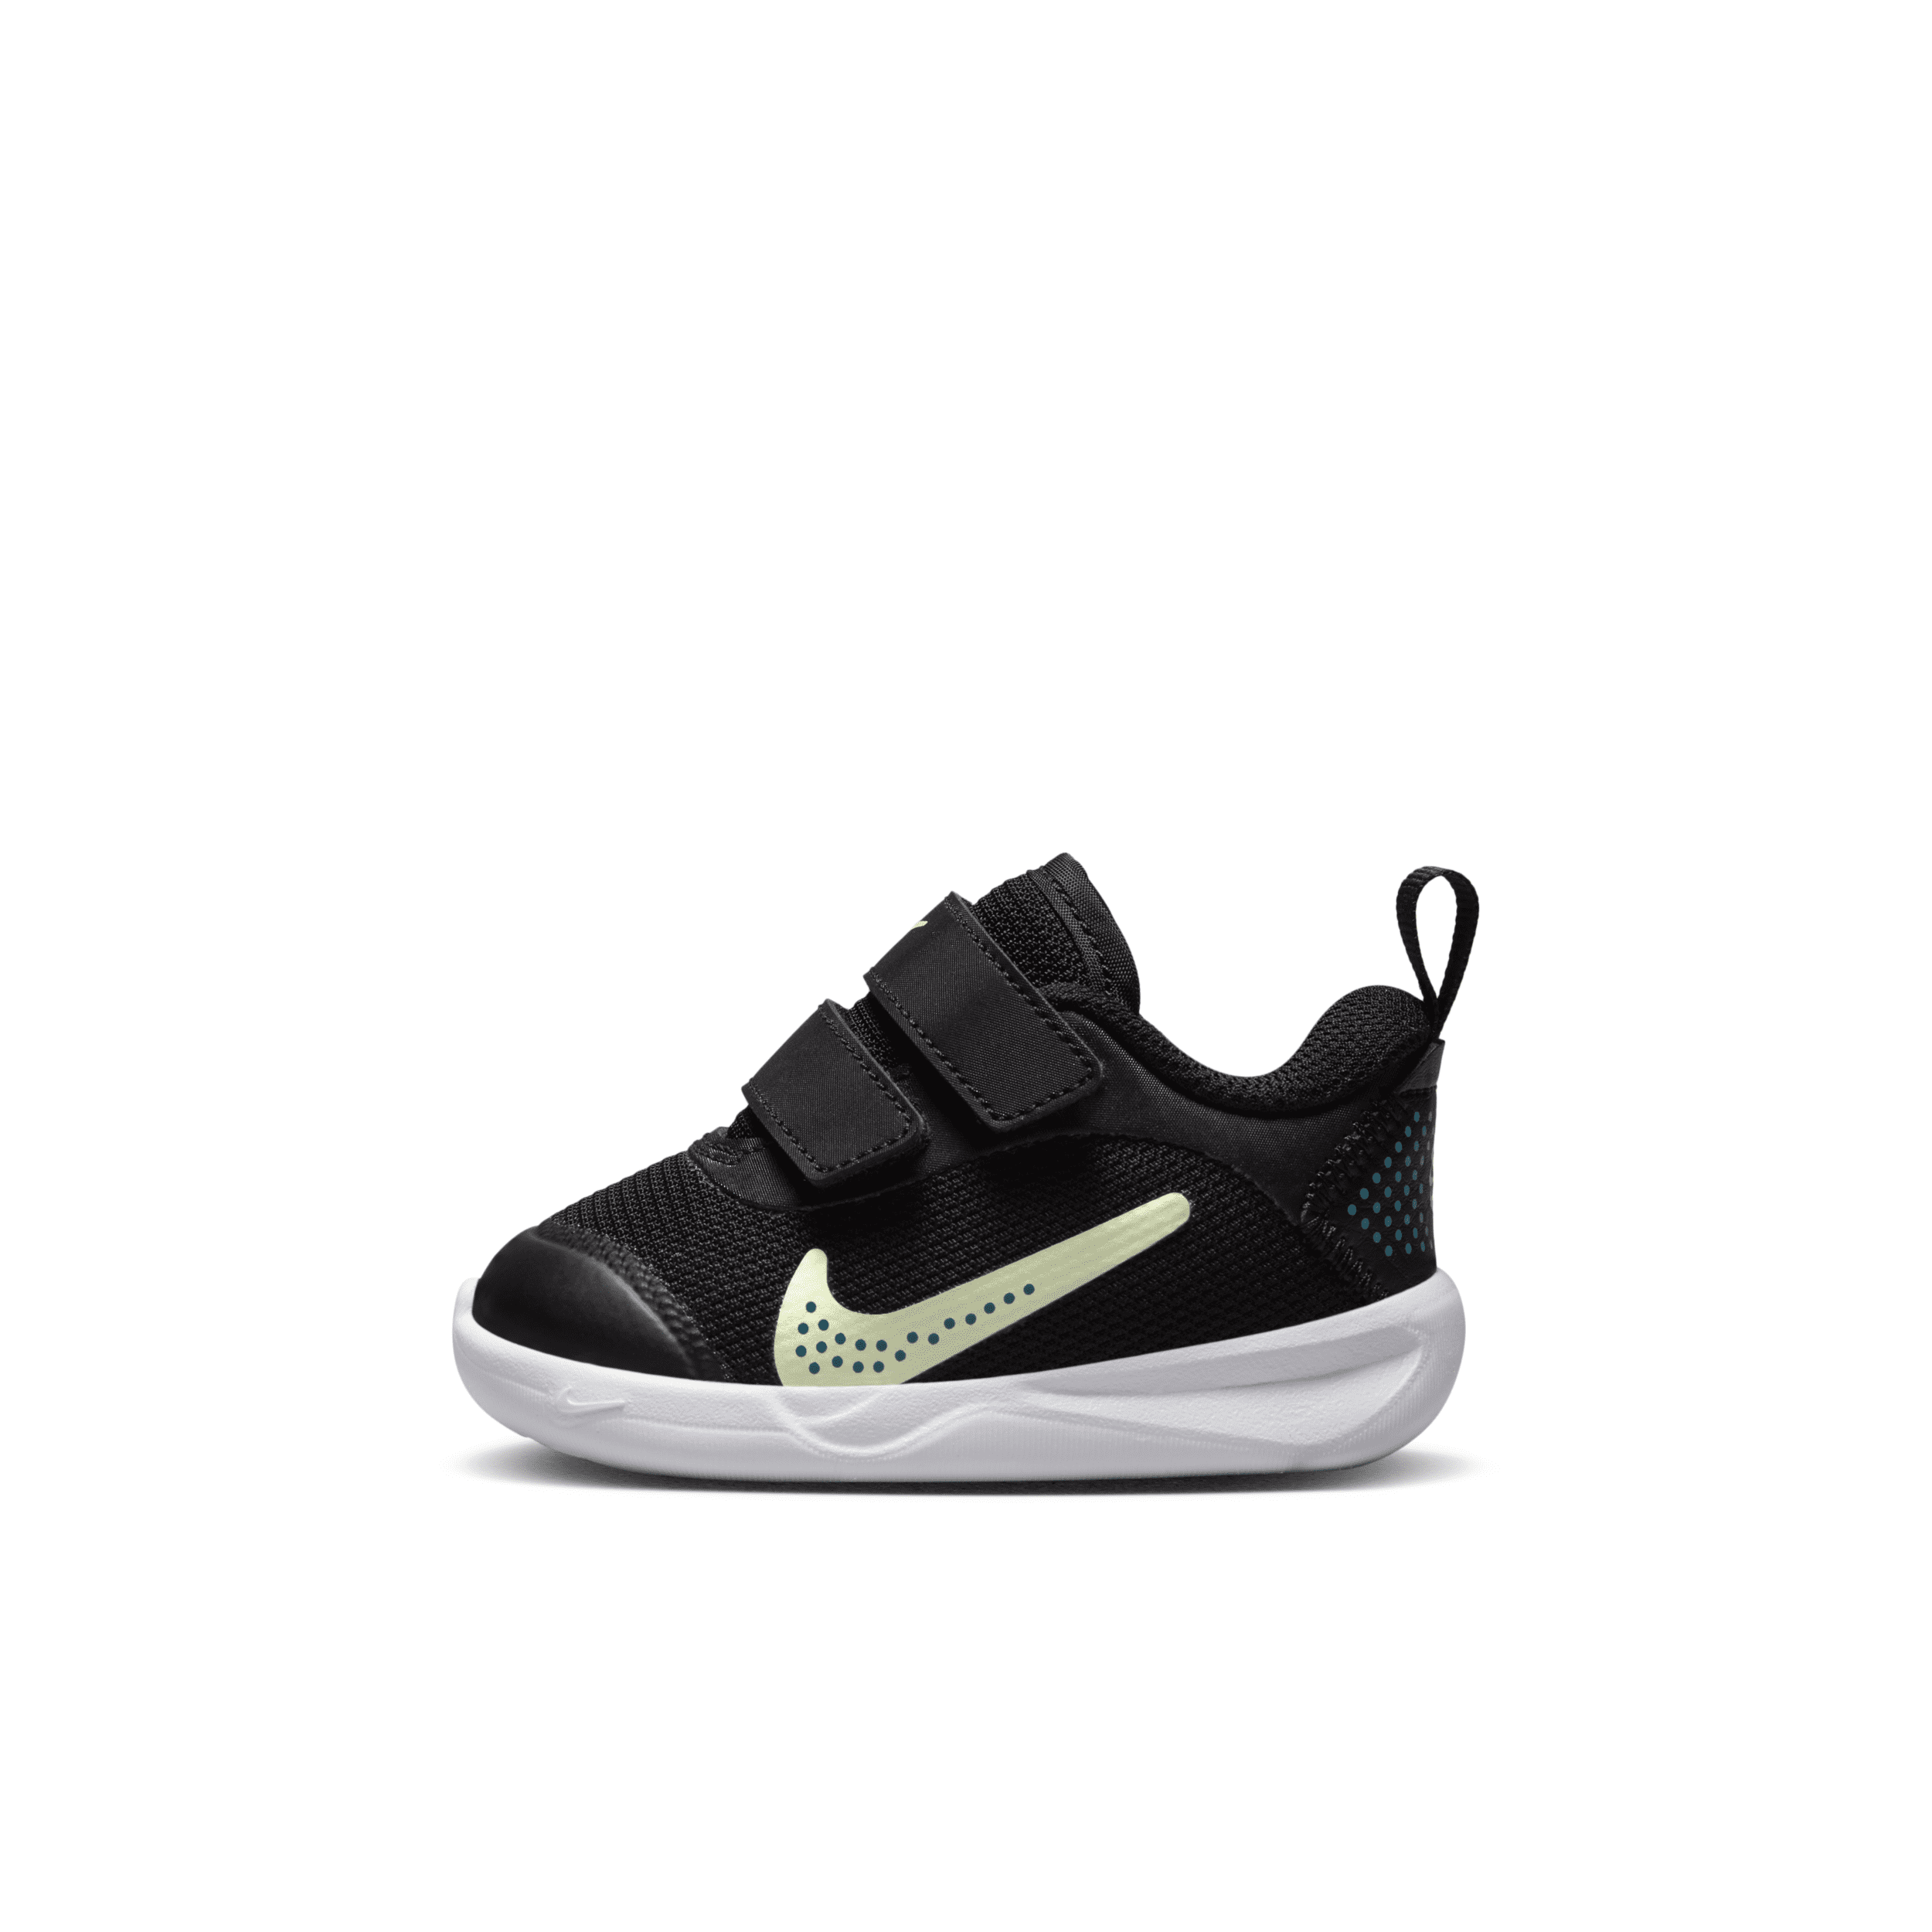 Nike Omni Multi-court Baby/toddler Shoes In Black/bright Spruce/white/barely Volt